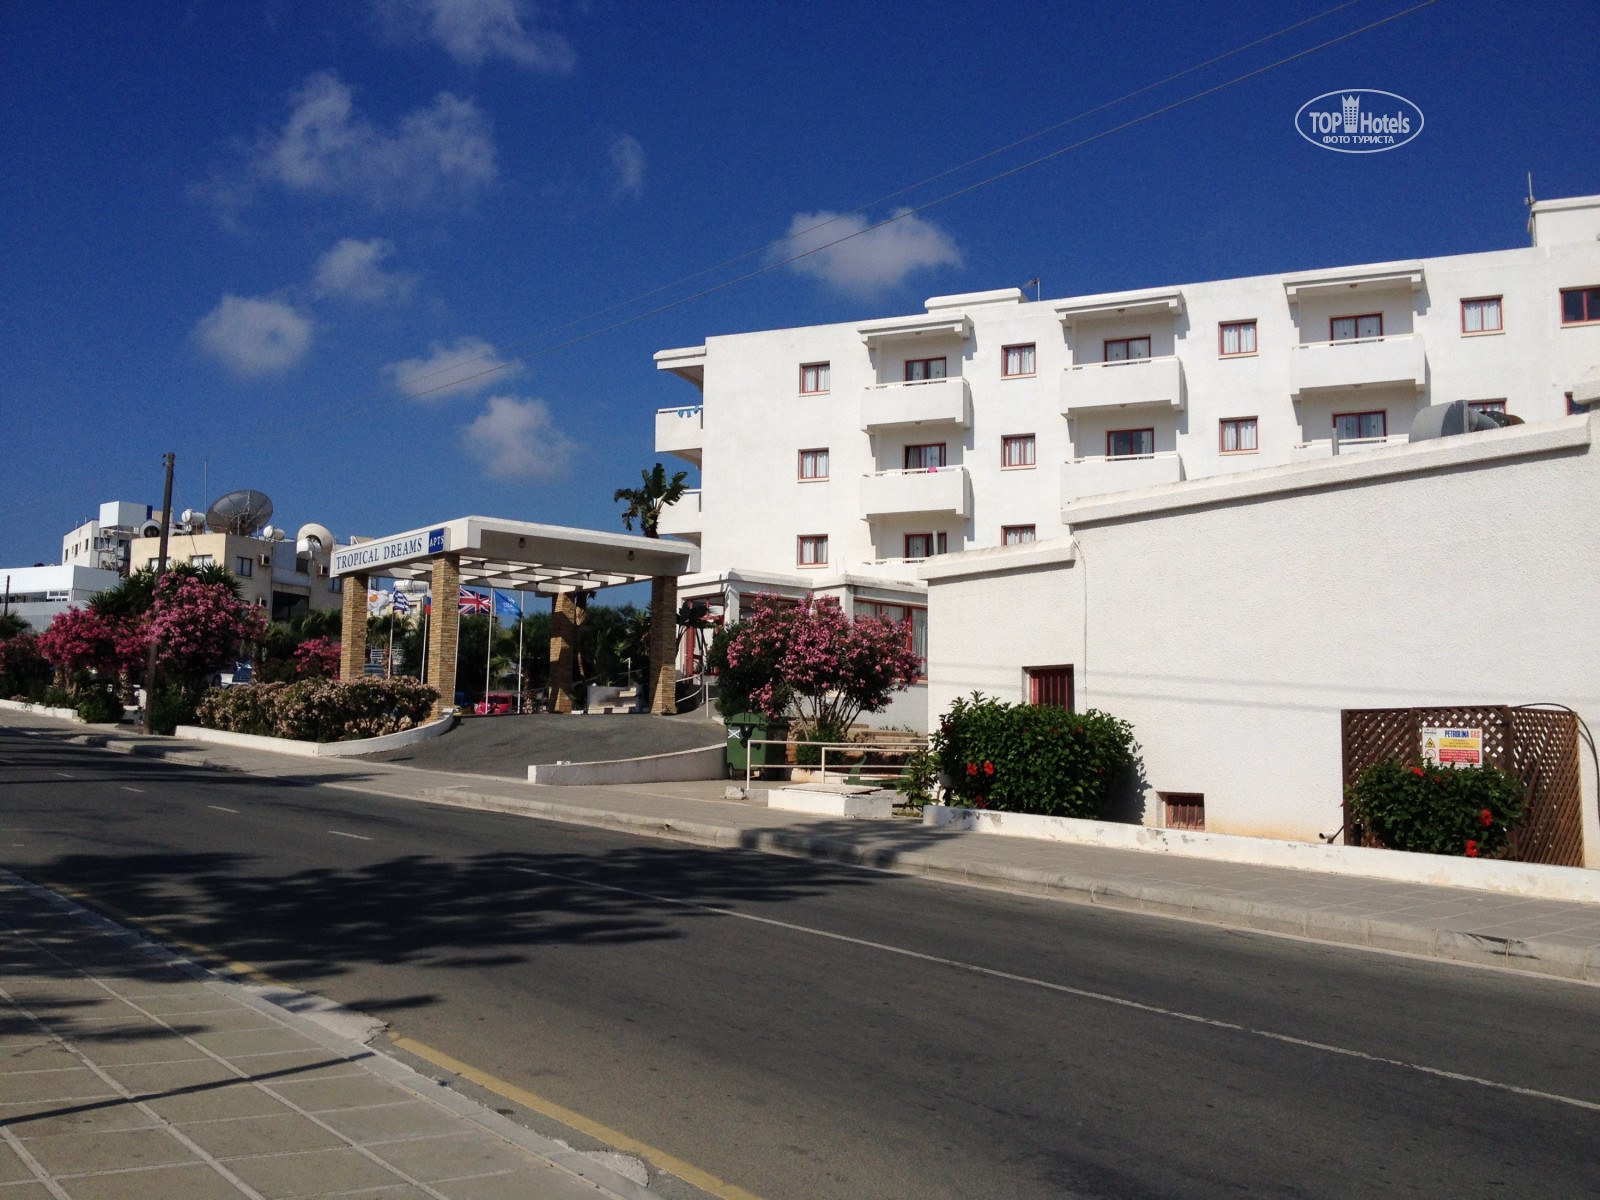 Tours to the hotel Tropical Dreams Hotel Apartments Protaras Cyprus